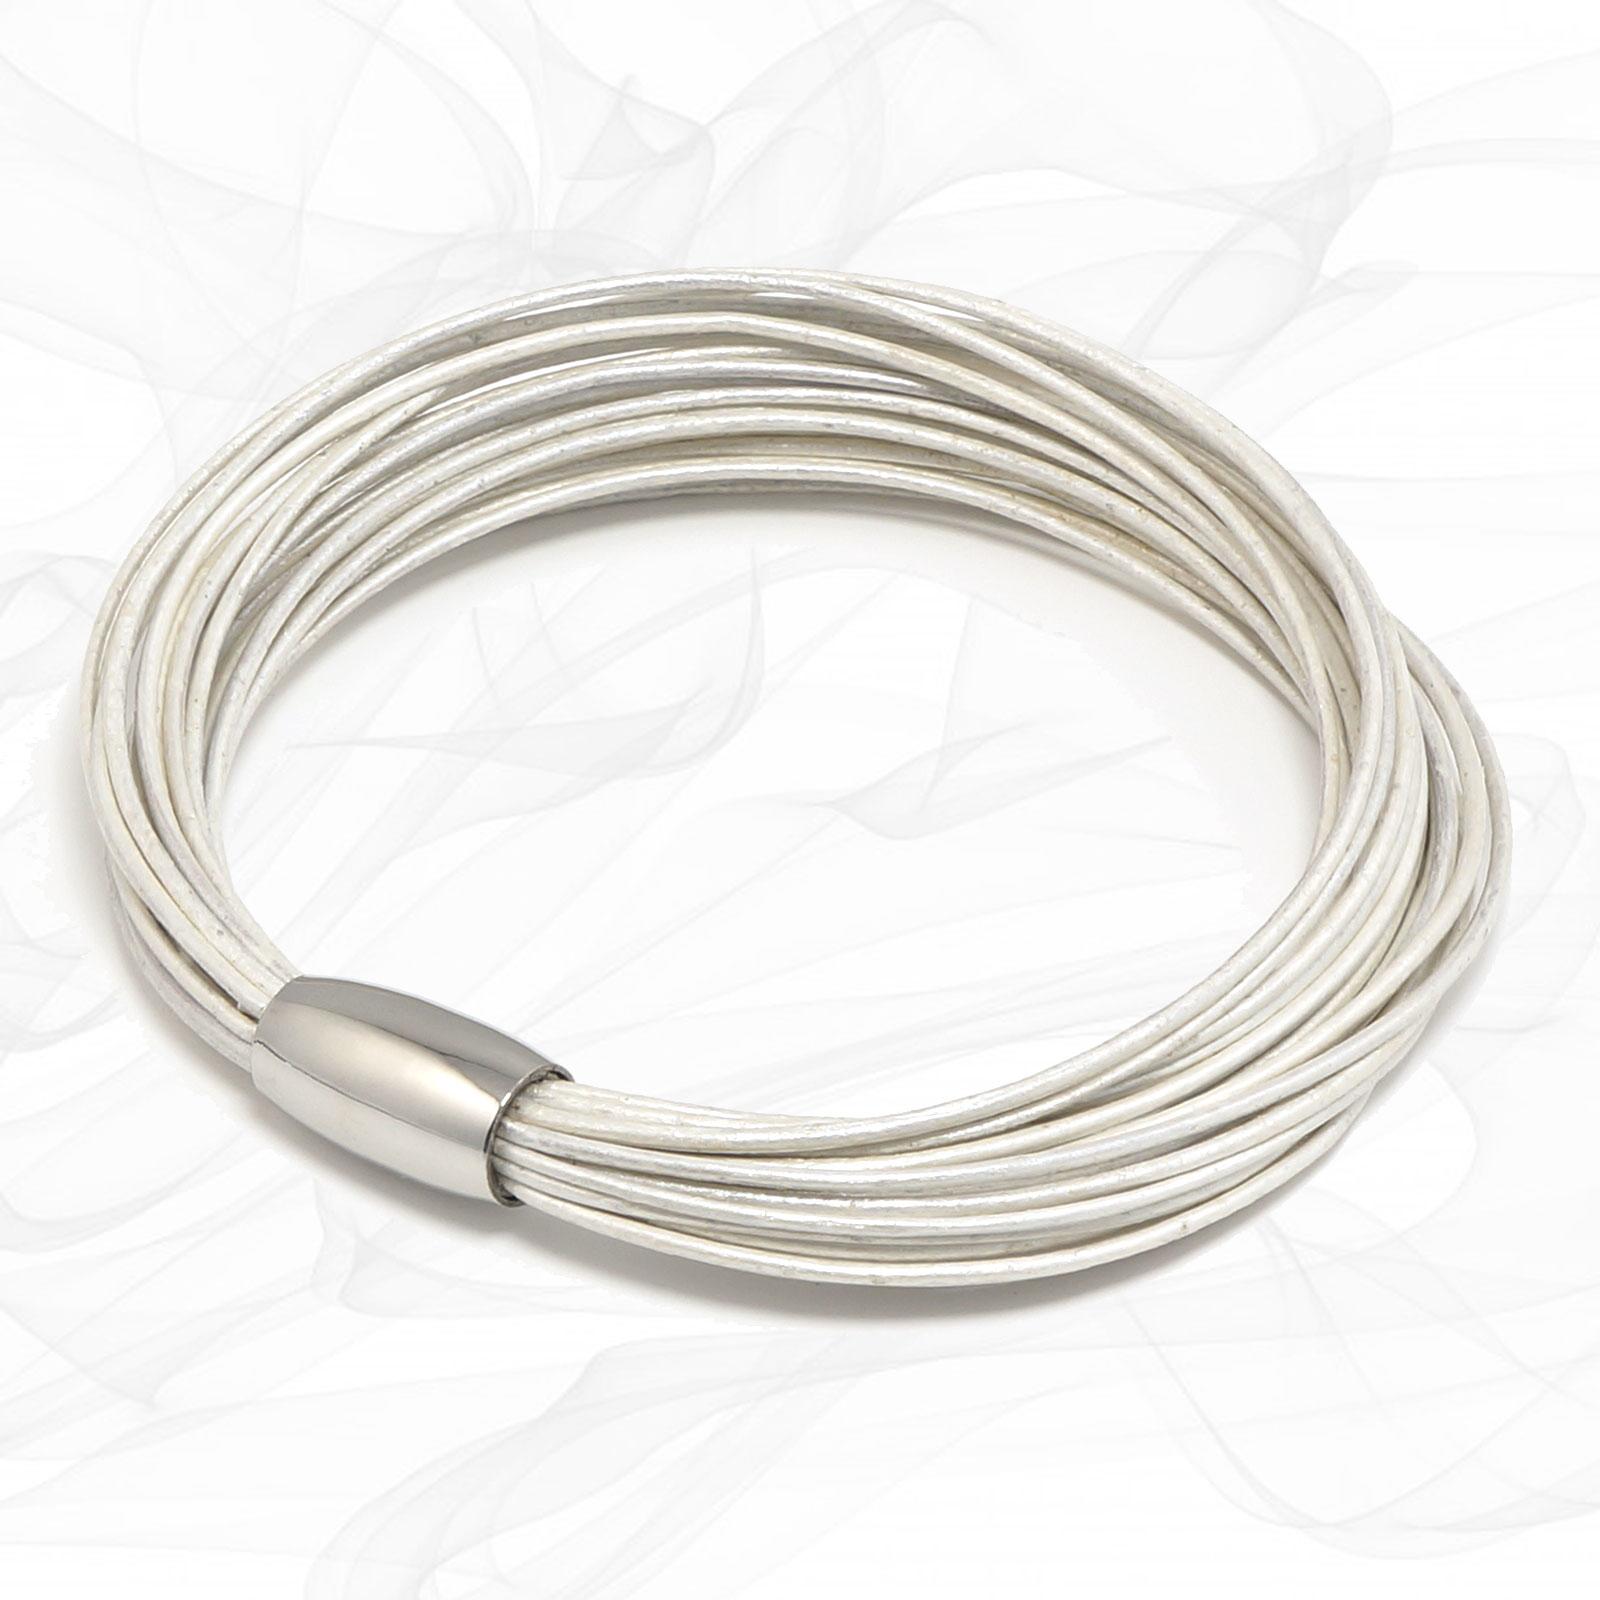 White Multi Strand Leather Bracelet for Women, one size, Limited Edition. With strong Magnetic Clasp.